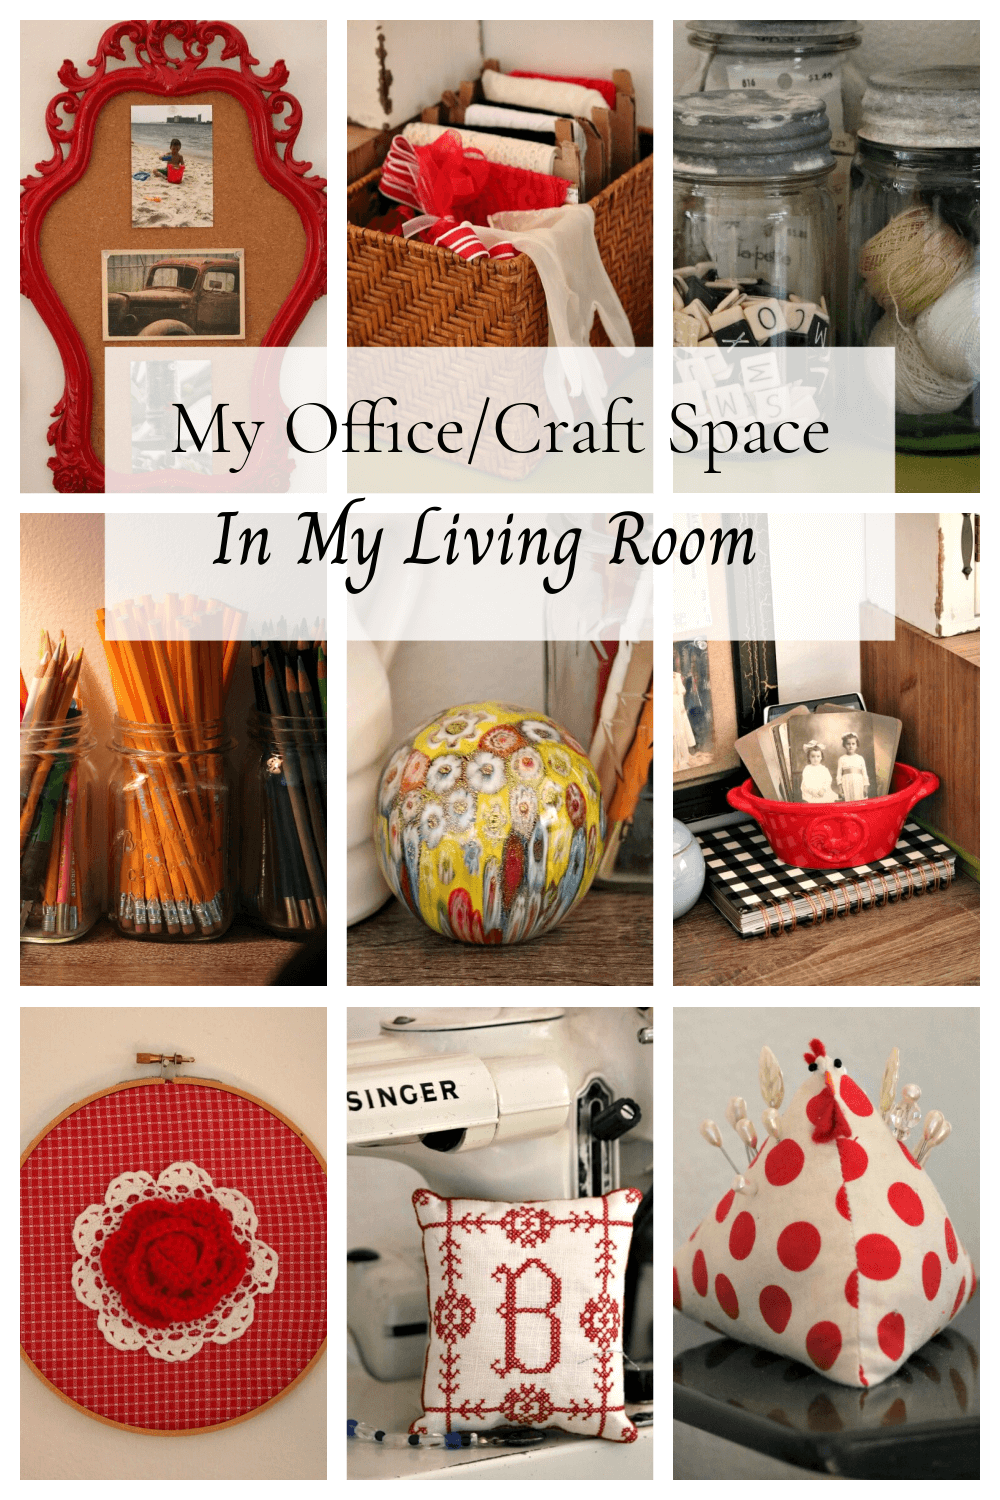 My Office/Craft Space In My Living Room